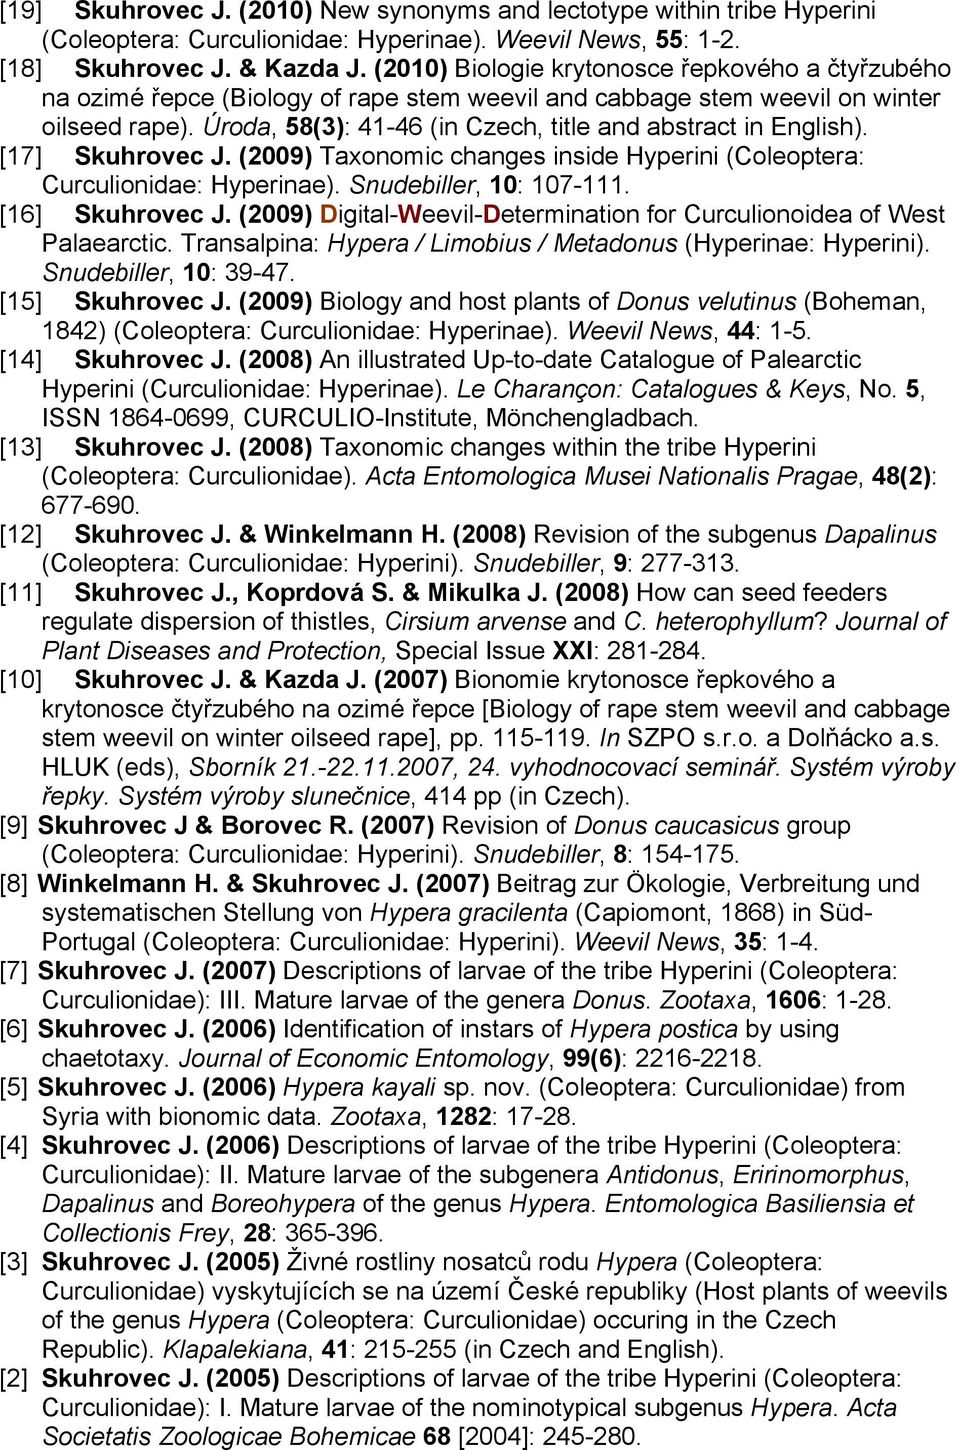 Úroda, 58(3): 41-46 (in Czech, title and abstract in English). [17] Skuhrovec J. (2009) Taxonomic changes inside Hyperini (Coleoptera: Curculionidae: Hyperinae). Snudebiller, 10: 107-111.